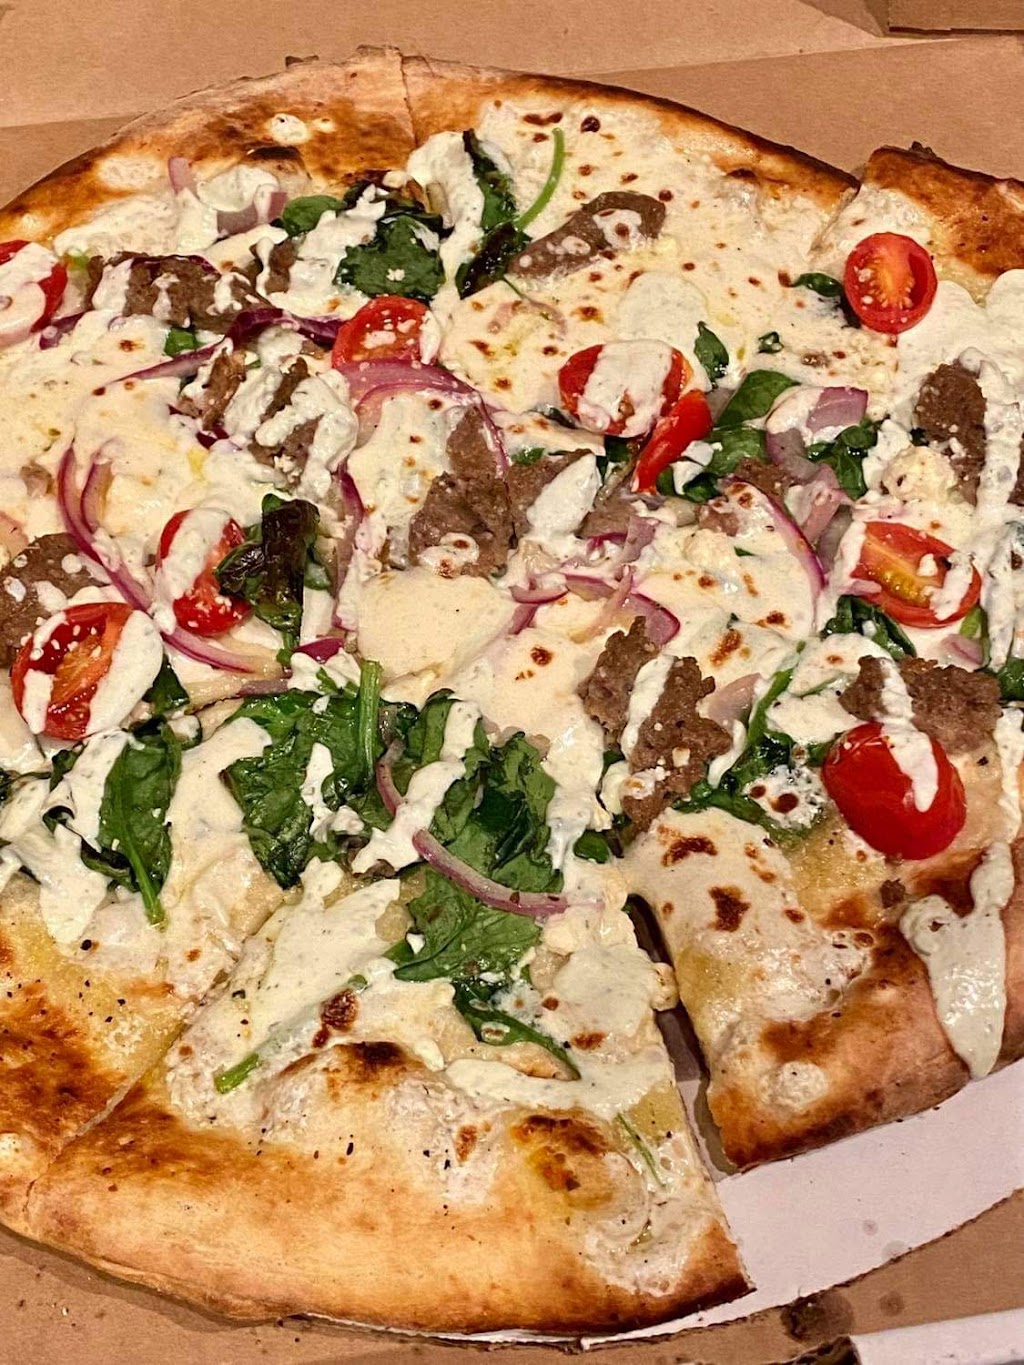 Zs Wood Fired Pizza | 118 Old San Antonio Rd, Boerne, TX 78006 | Phone: (830) 331-1212